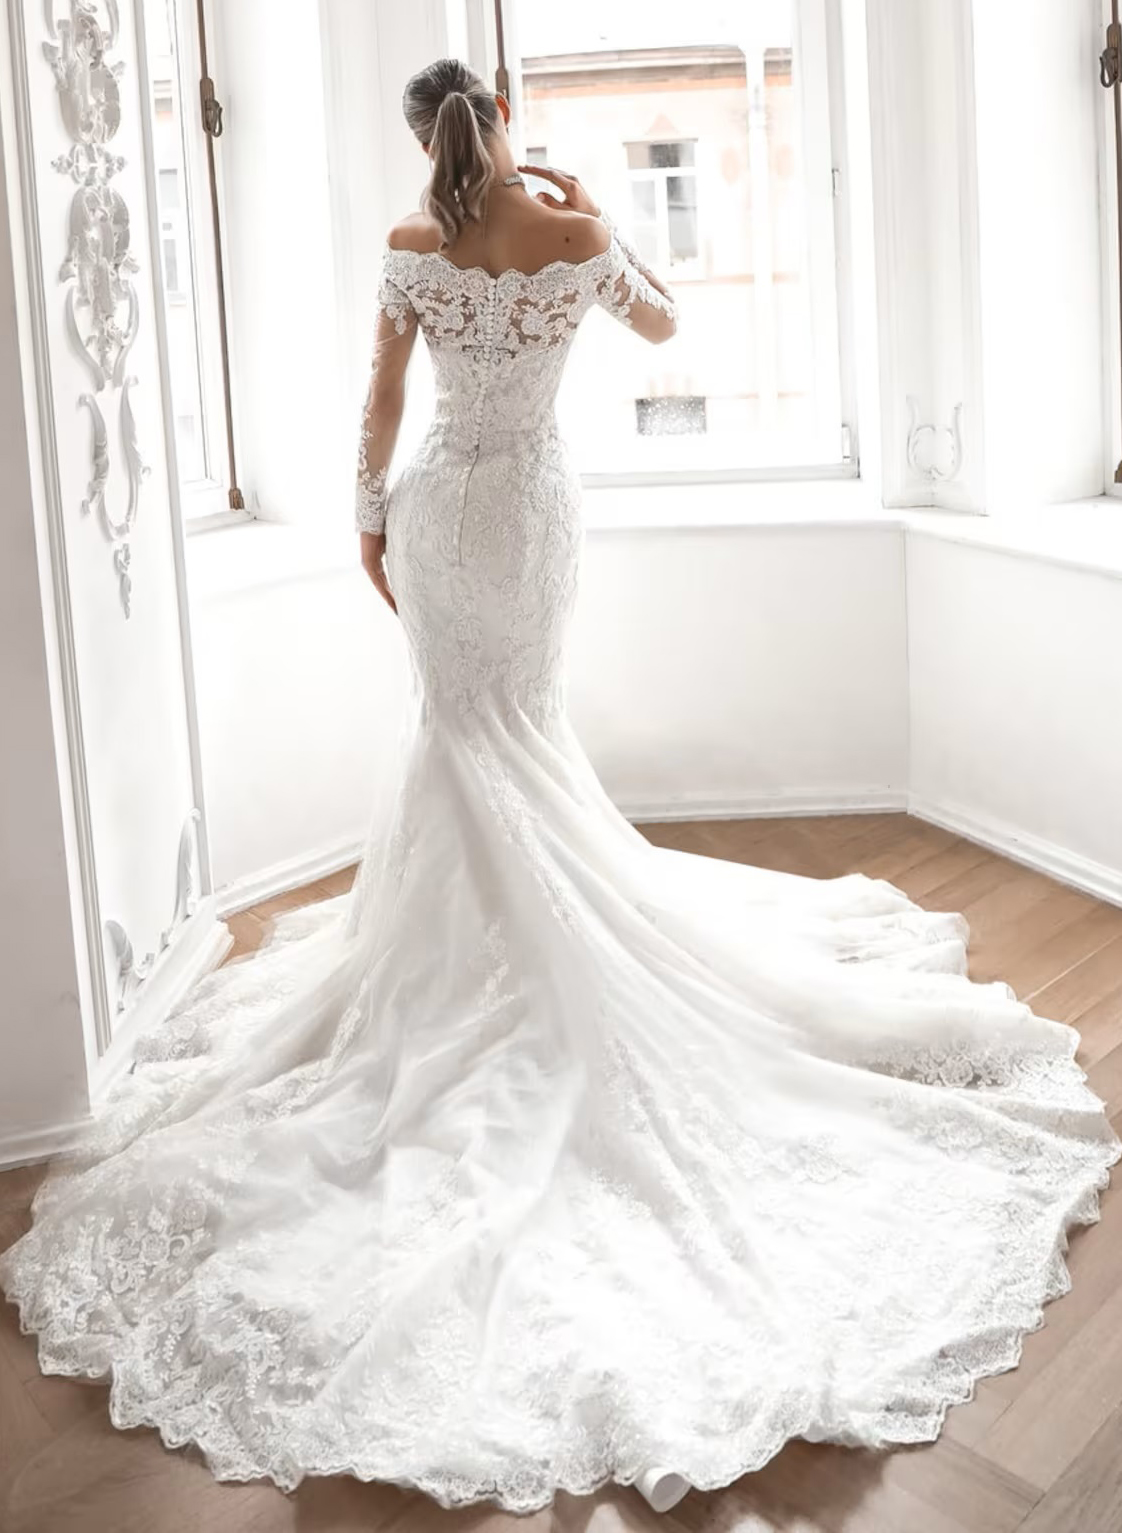 Luxury Lace Long Sleeves Off-the-Shoulder Wedding Dresses